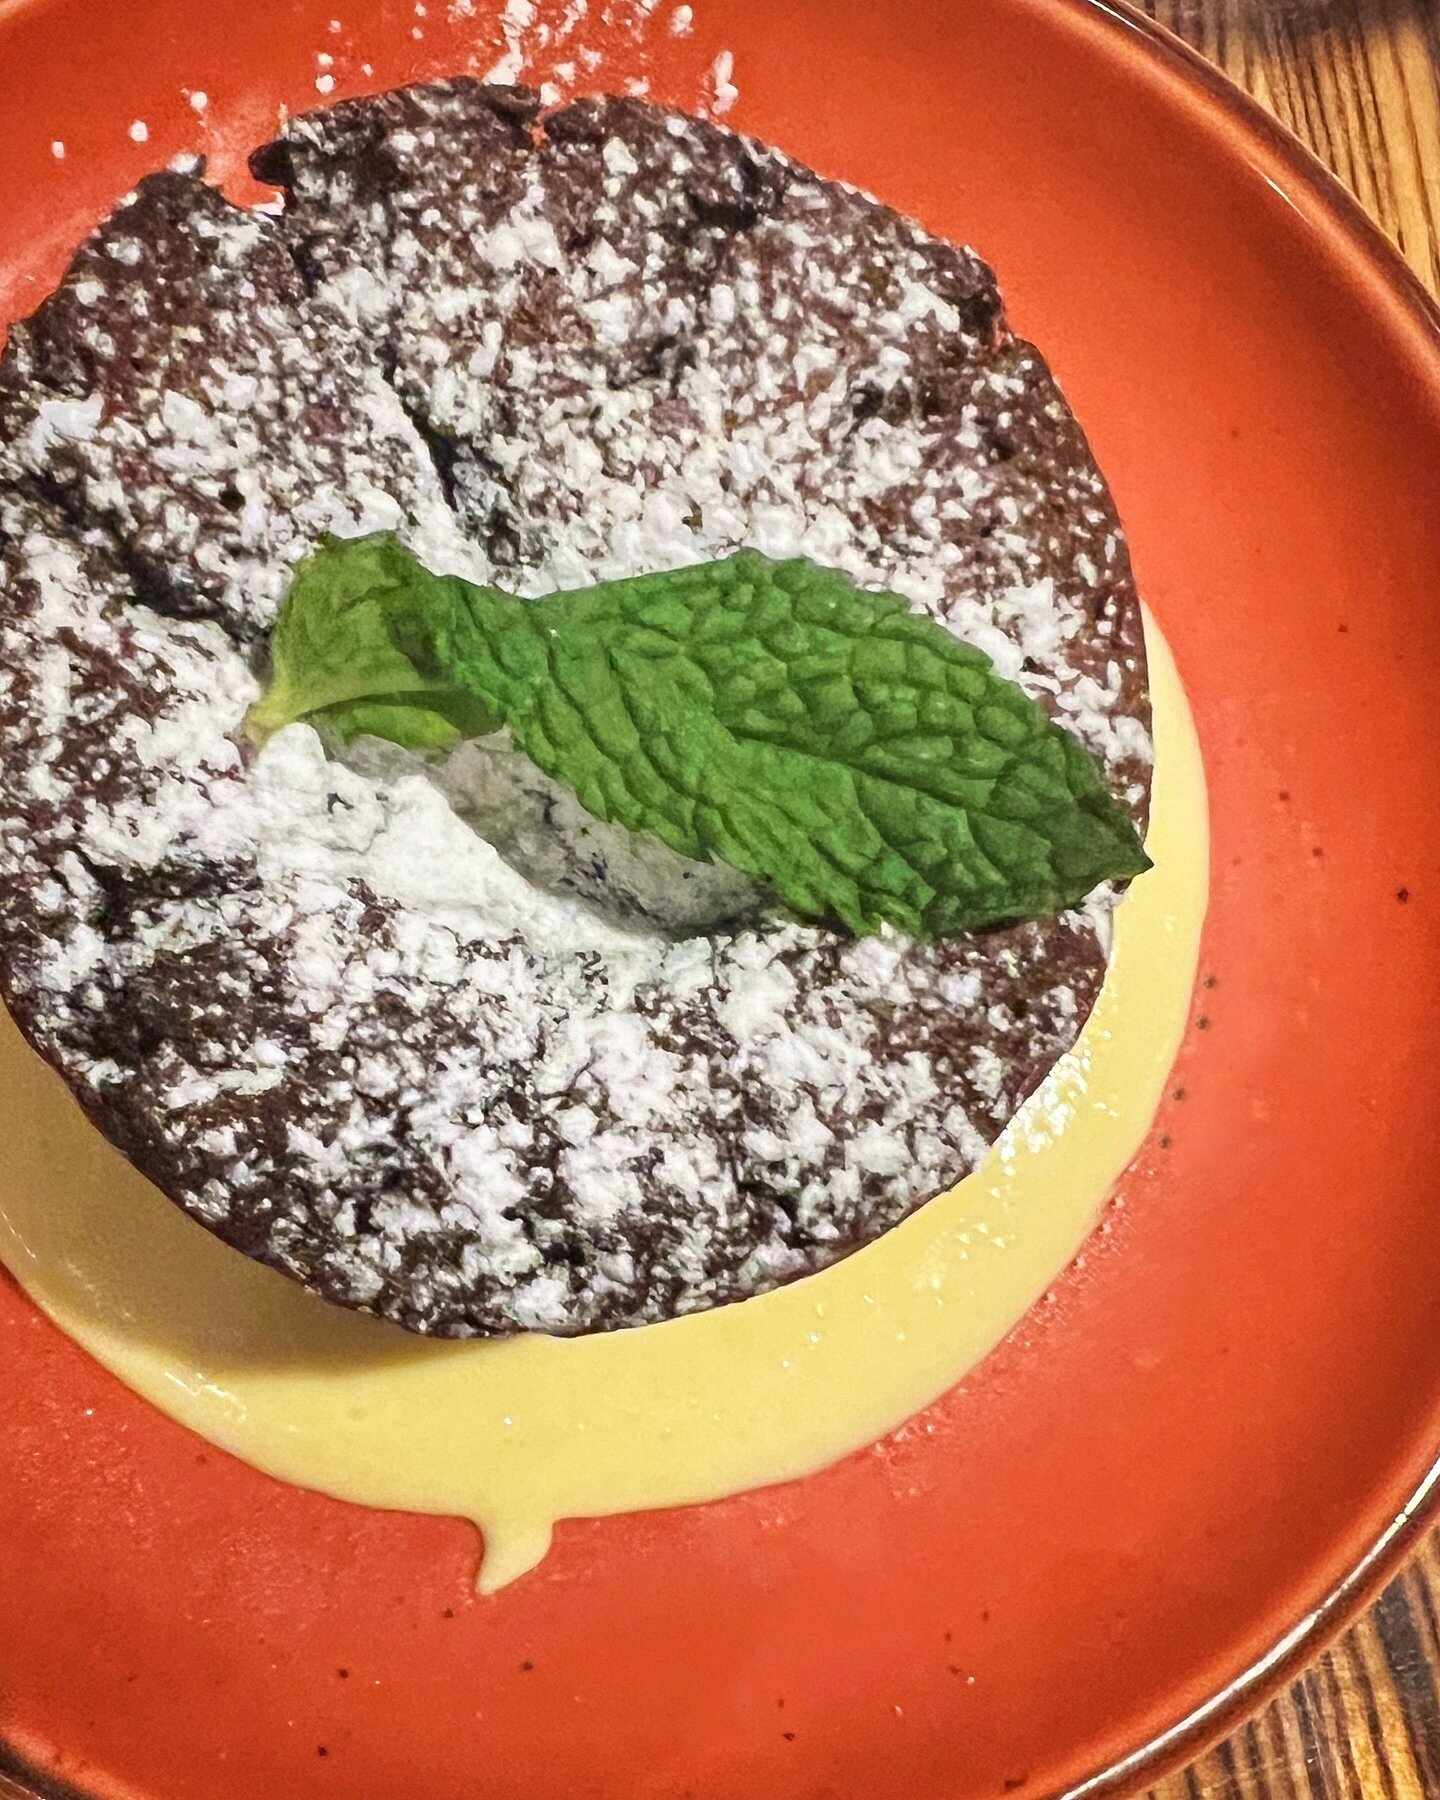 DINE // this flourless chocolate cake @tazzakitchen is now on my favorite #Raleigh desserts list! #ilovechocolate #tazzakitchen #shopvillagedistrict #raleighfoodies